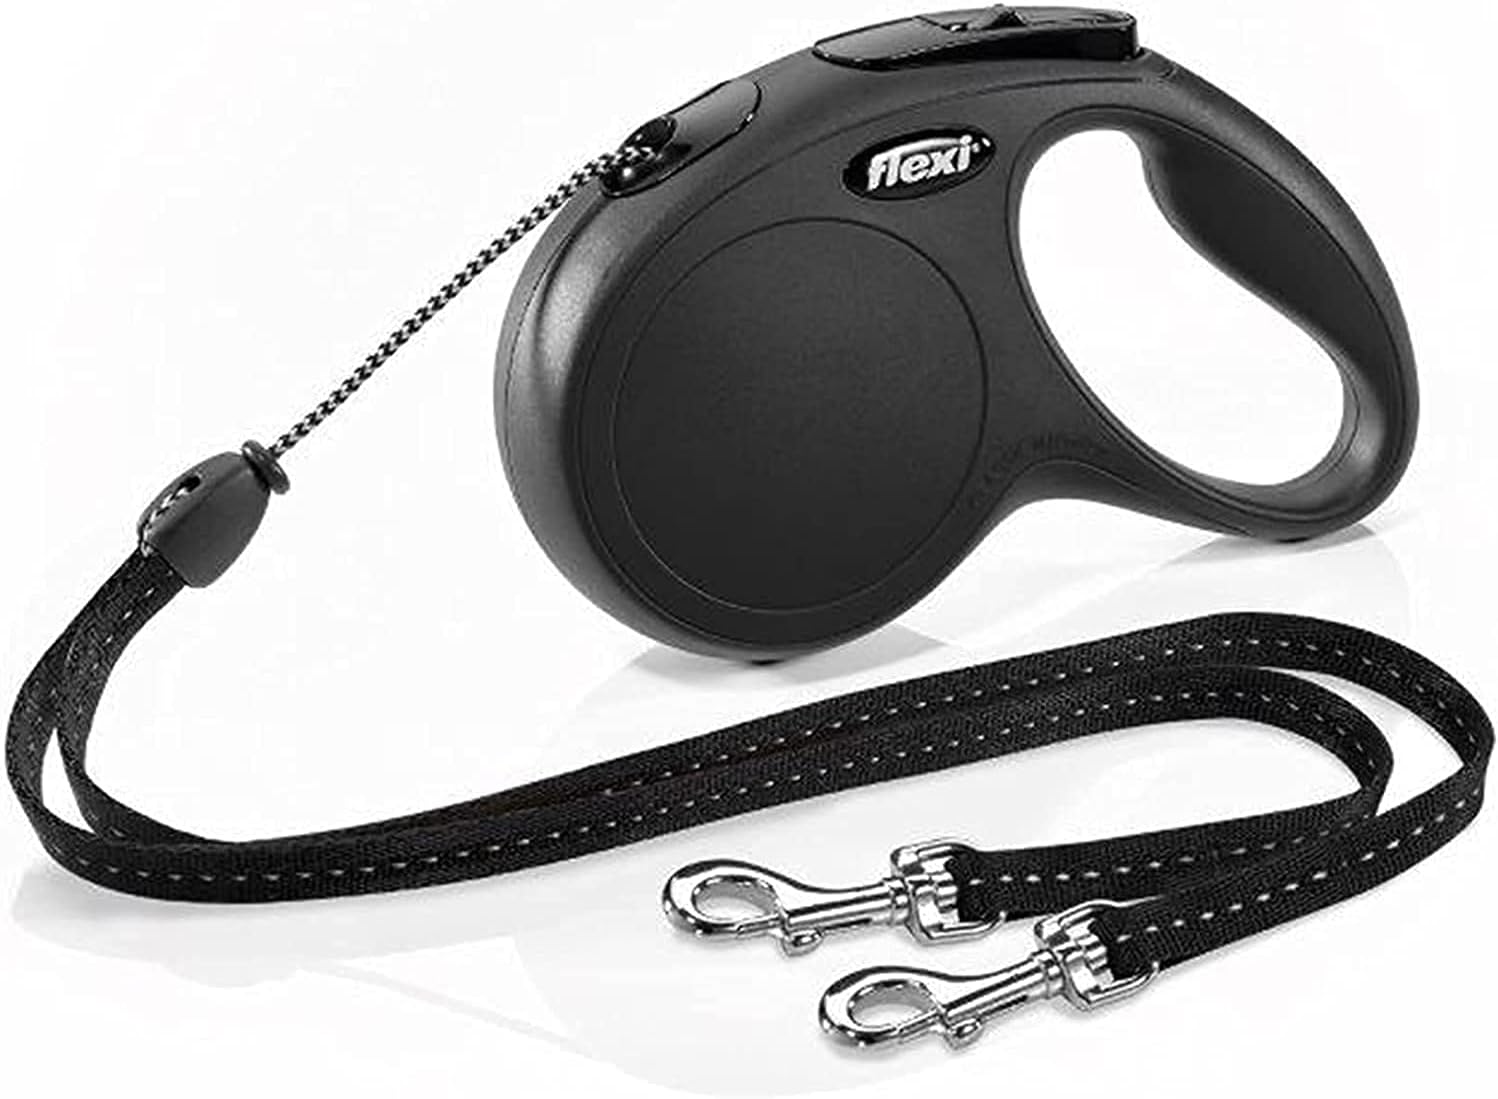 Master Walks with Ease: FLEXI Classic Duo Cord Dog Leash - Black, 18 lbs, 16ft Length